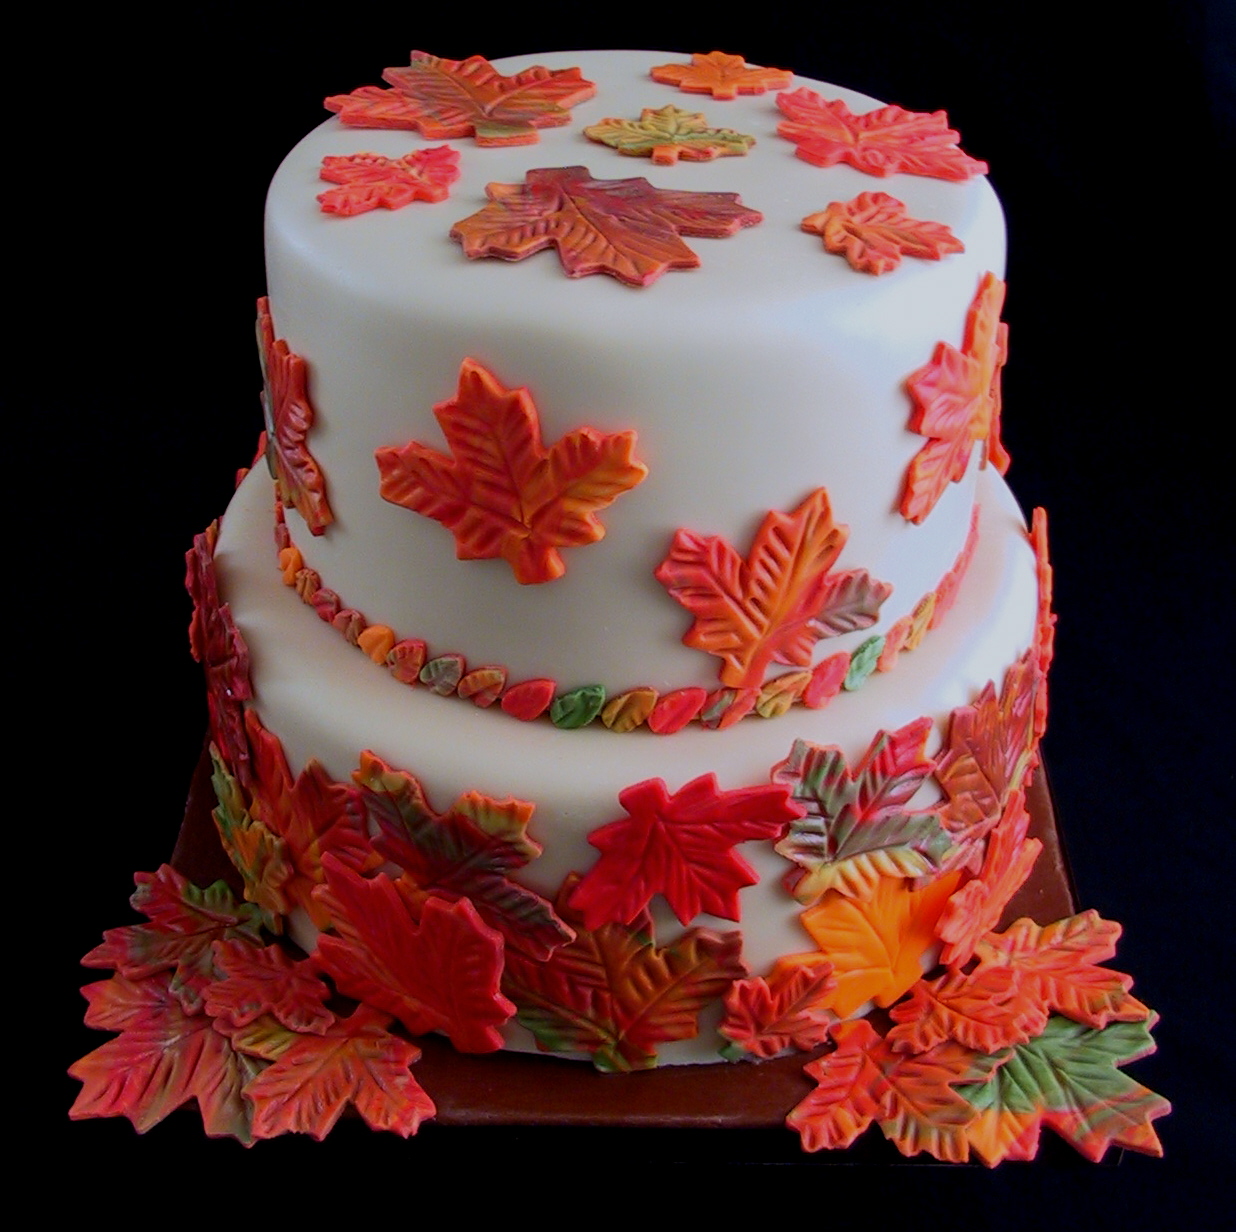 Fondant Cakes with Fall Leaves